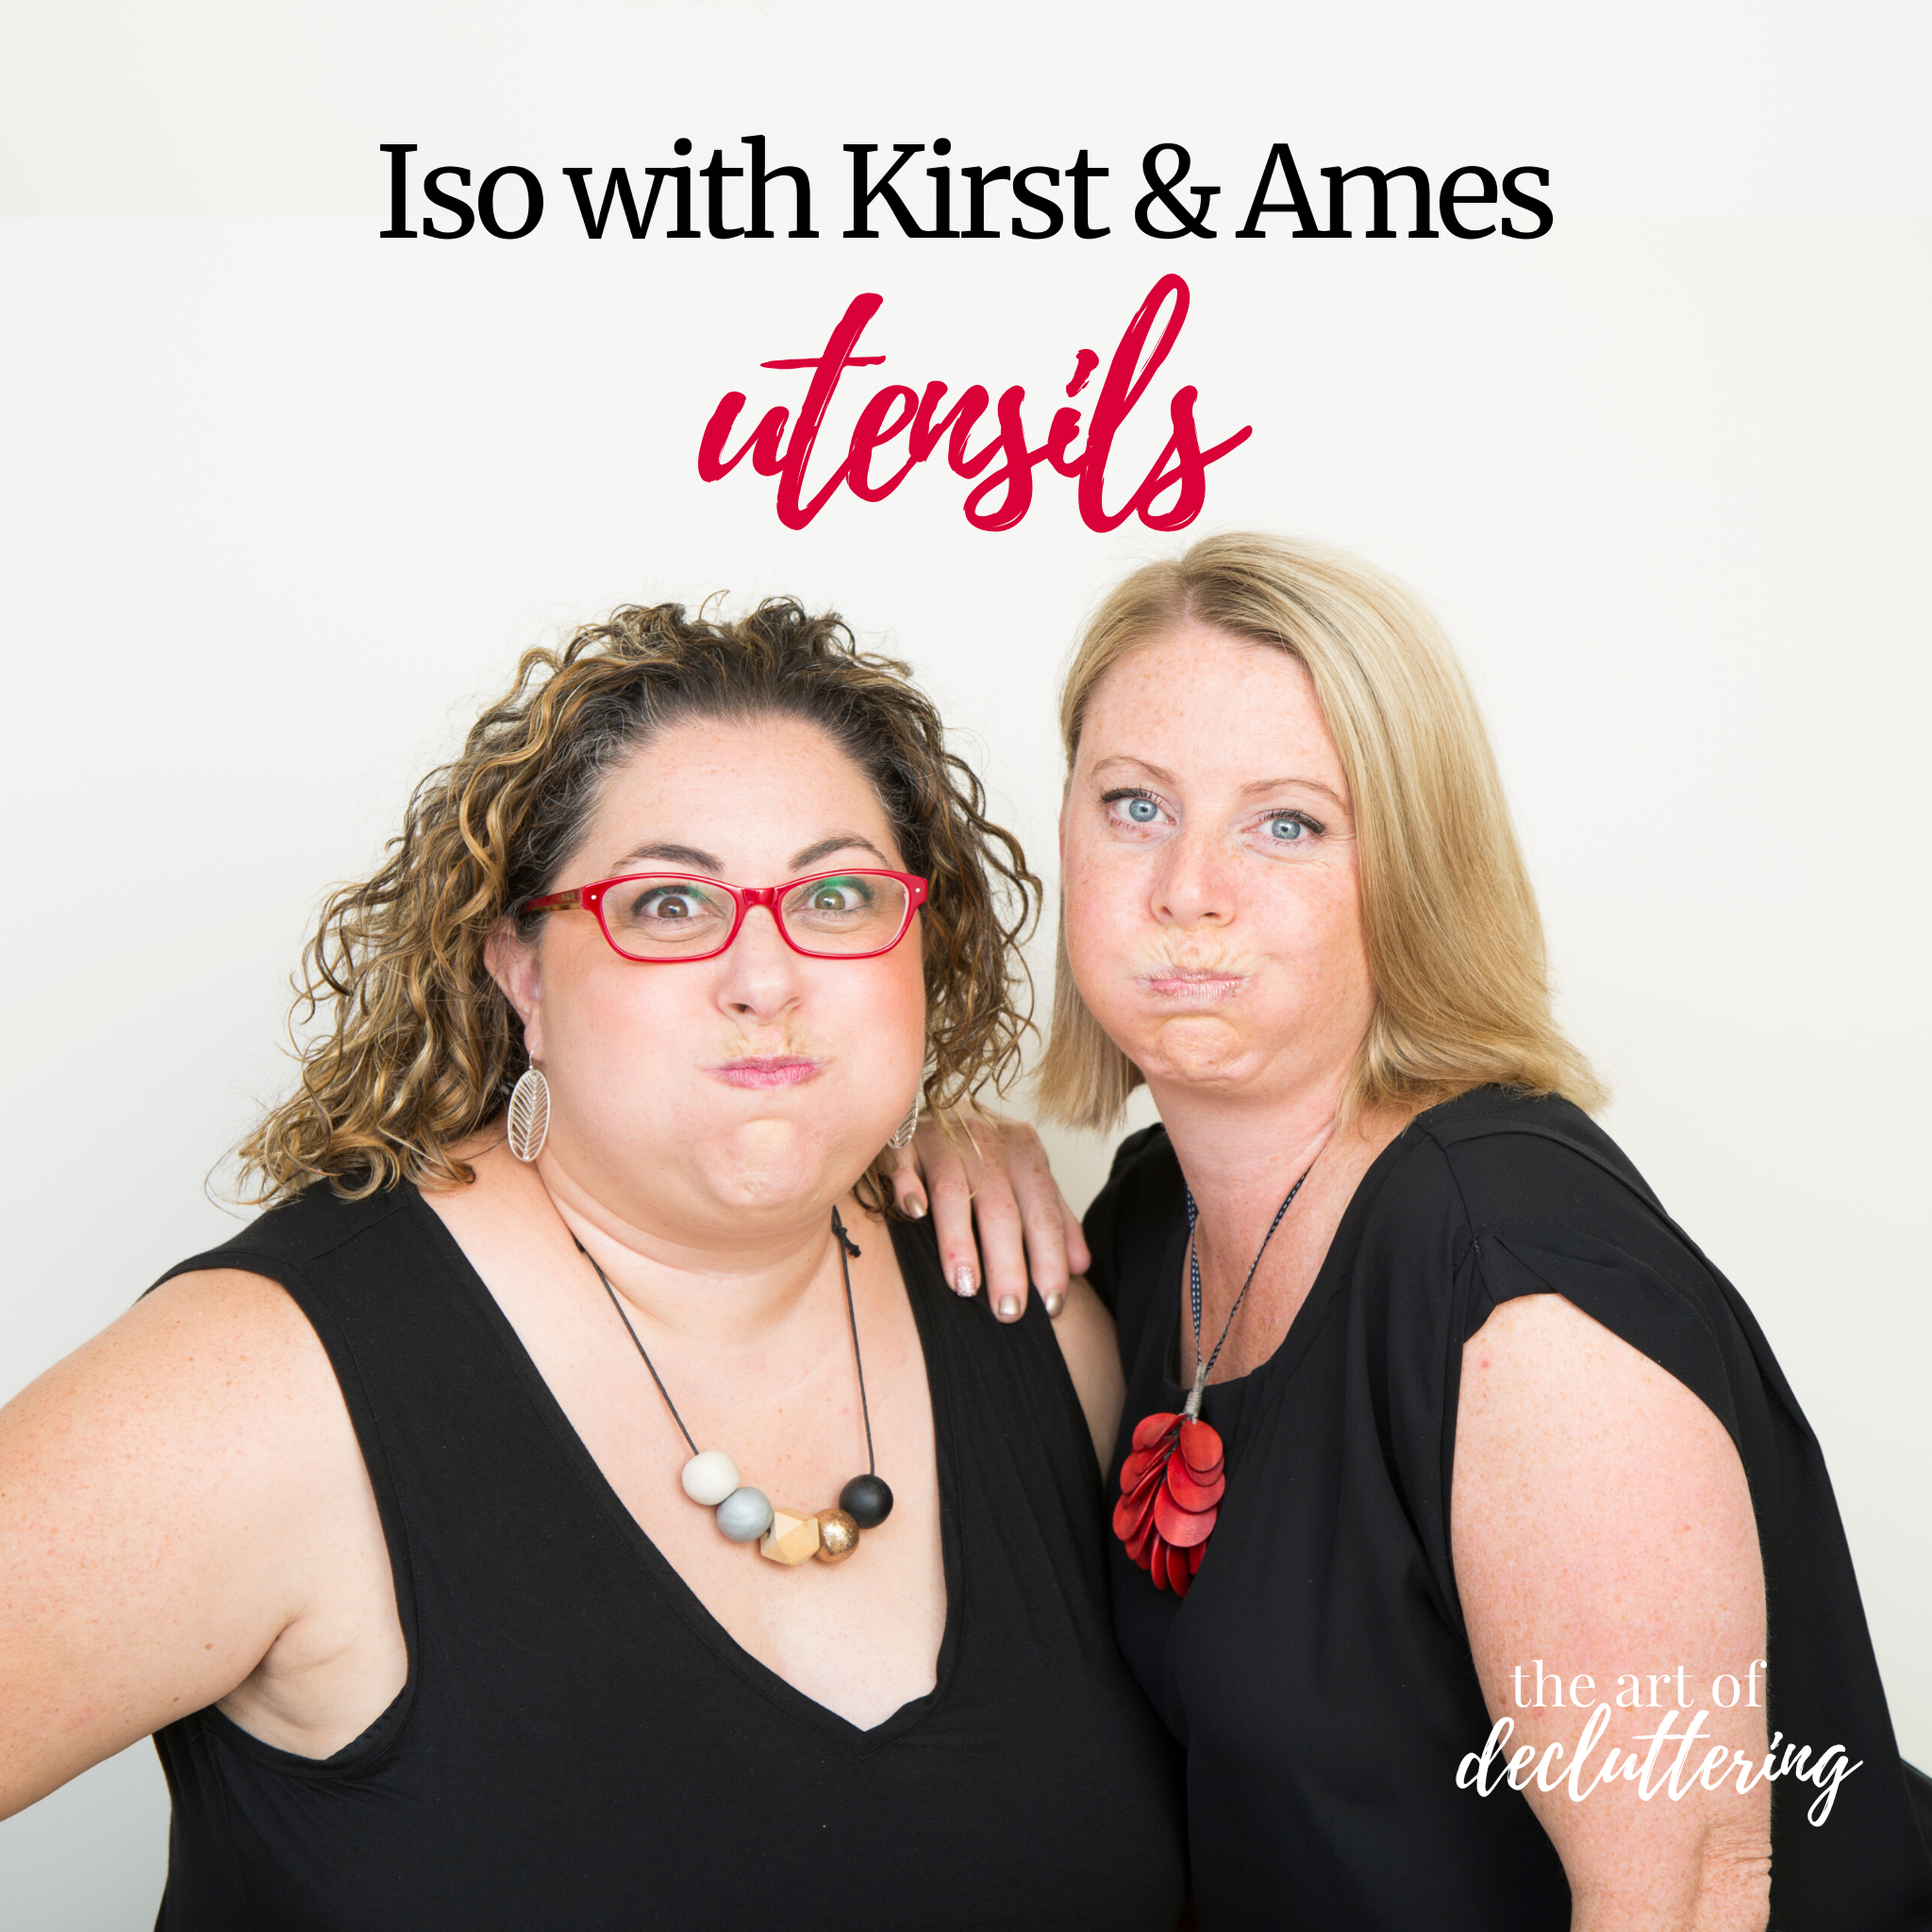 Iso with Kirst & Ames - Utensils